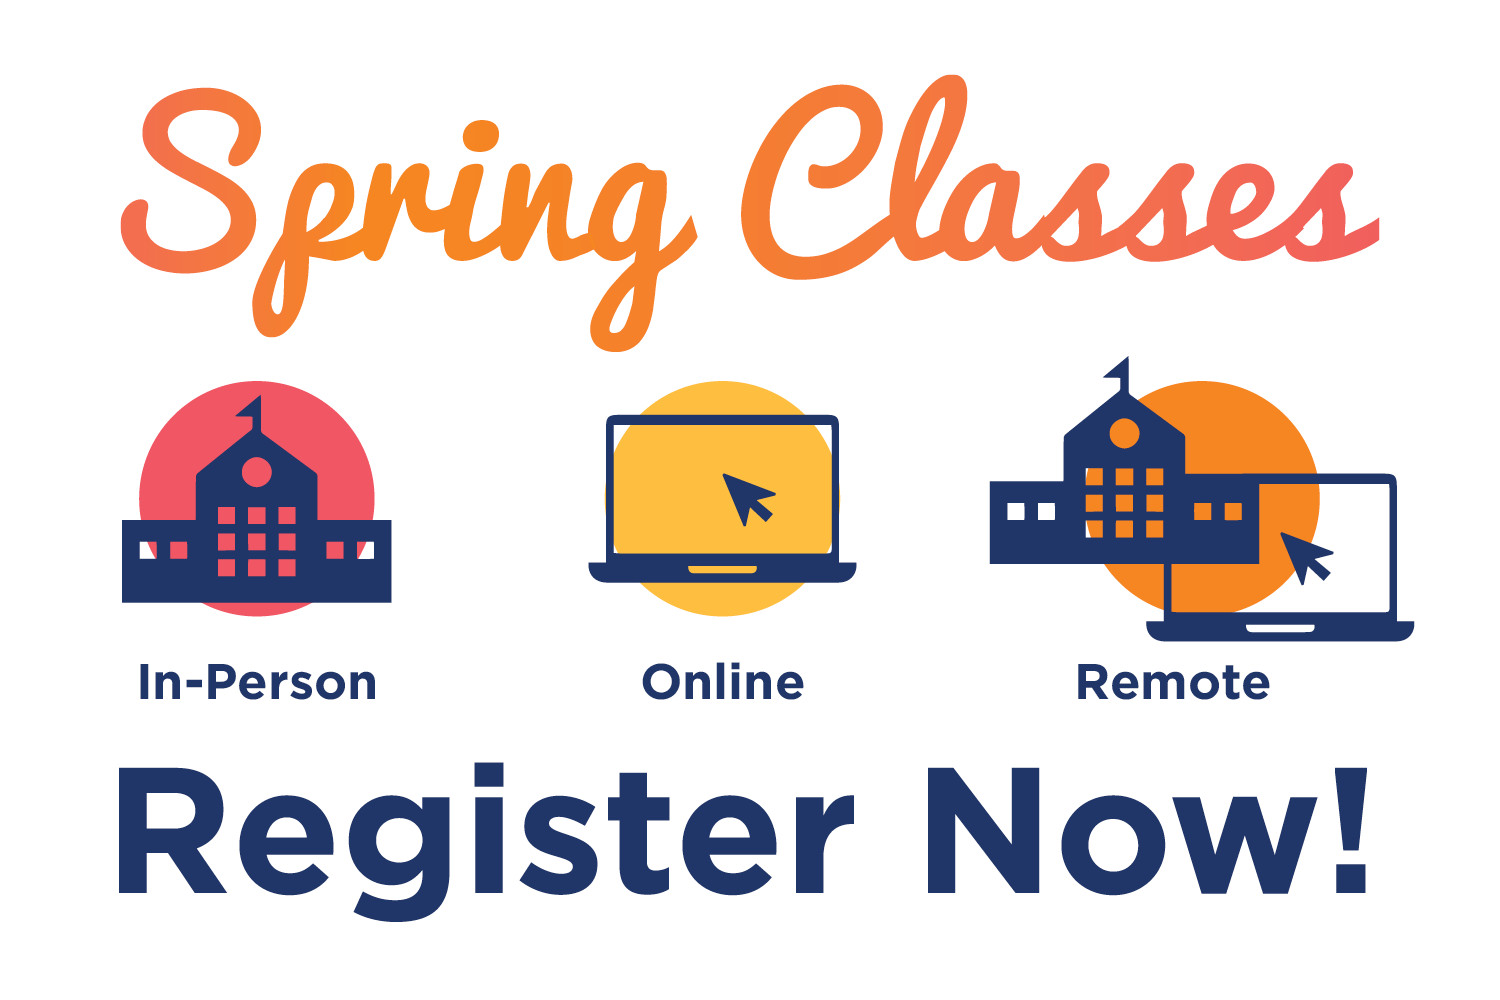 Ecc Academic Calendar 2022 In-Person, Online And Streaming Classes At Ecc This Spring - East Central  College - East Central College